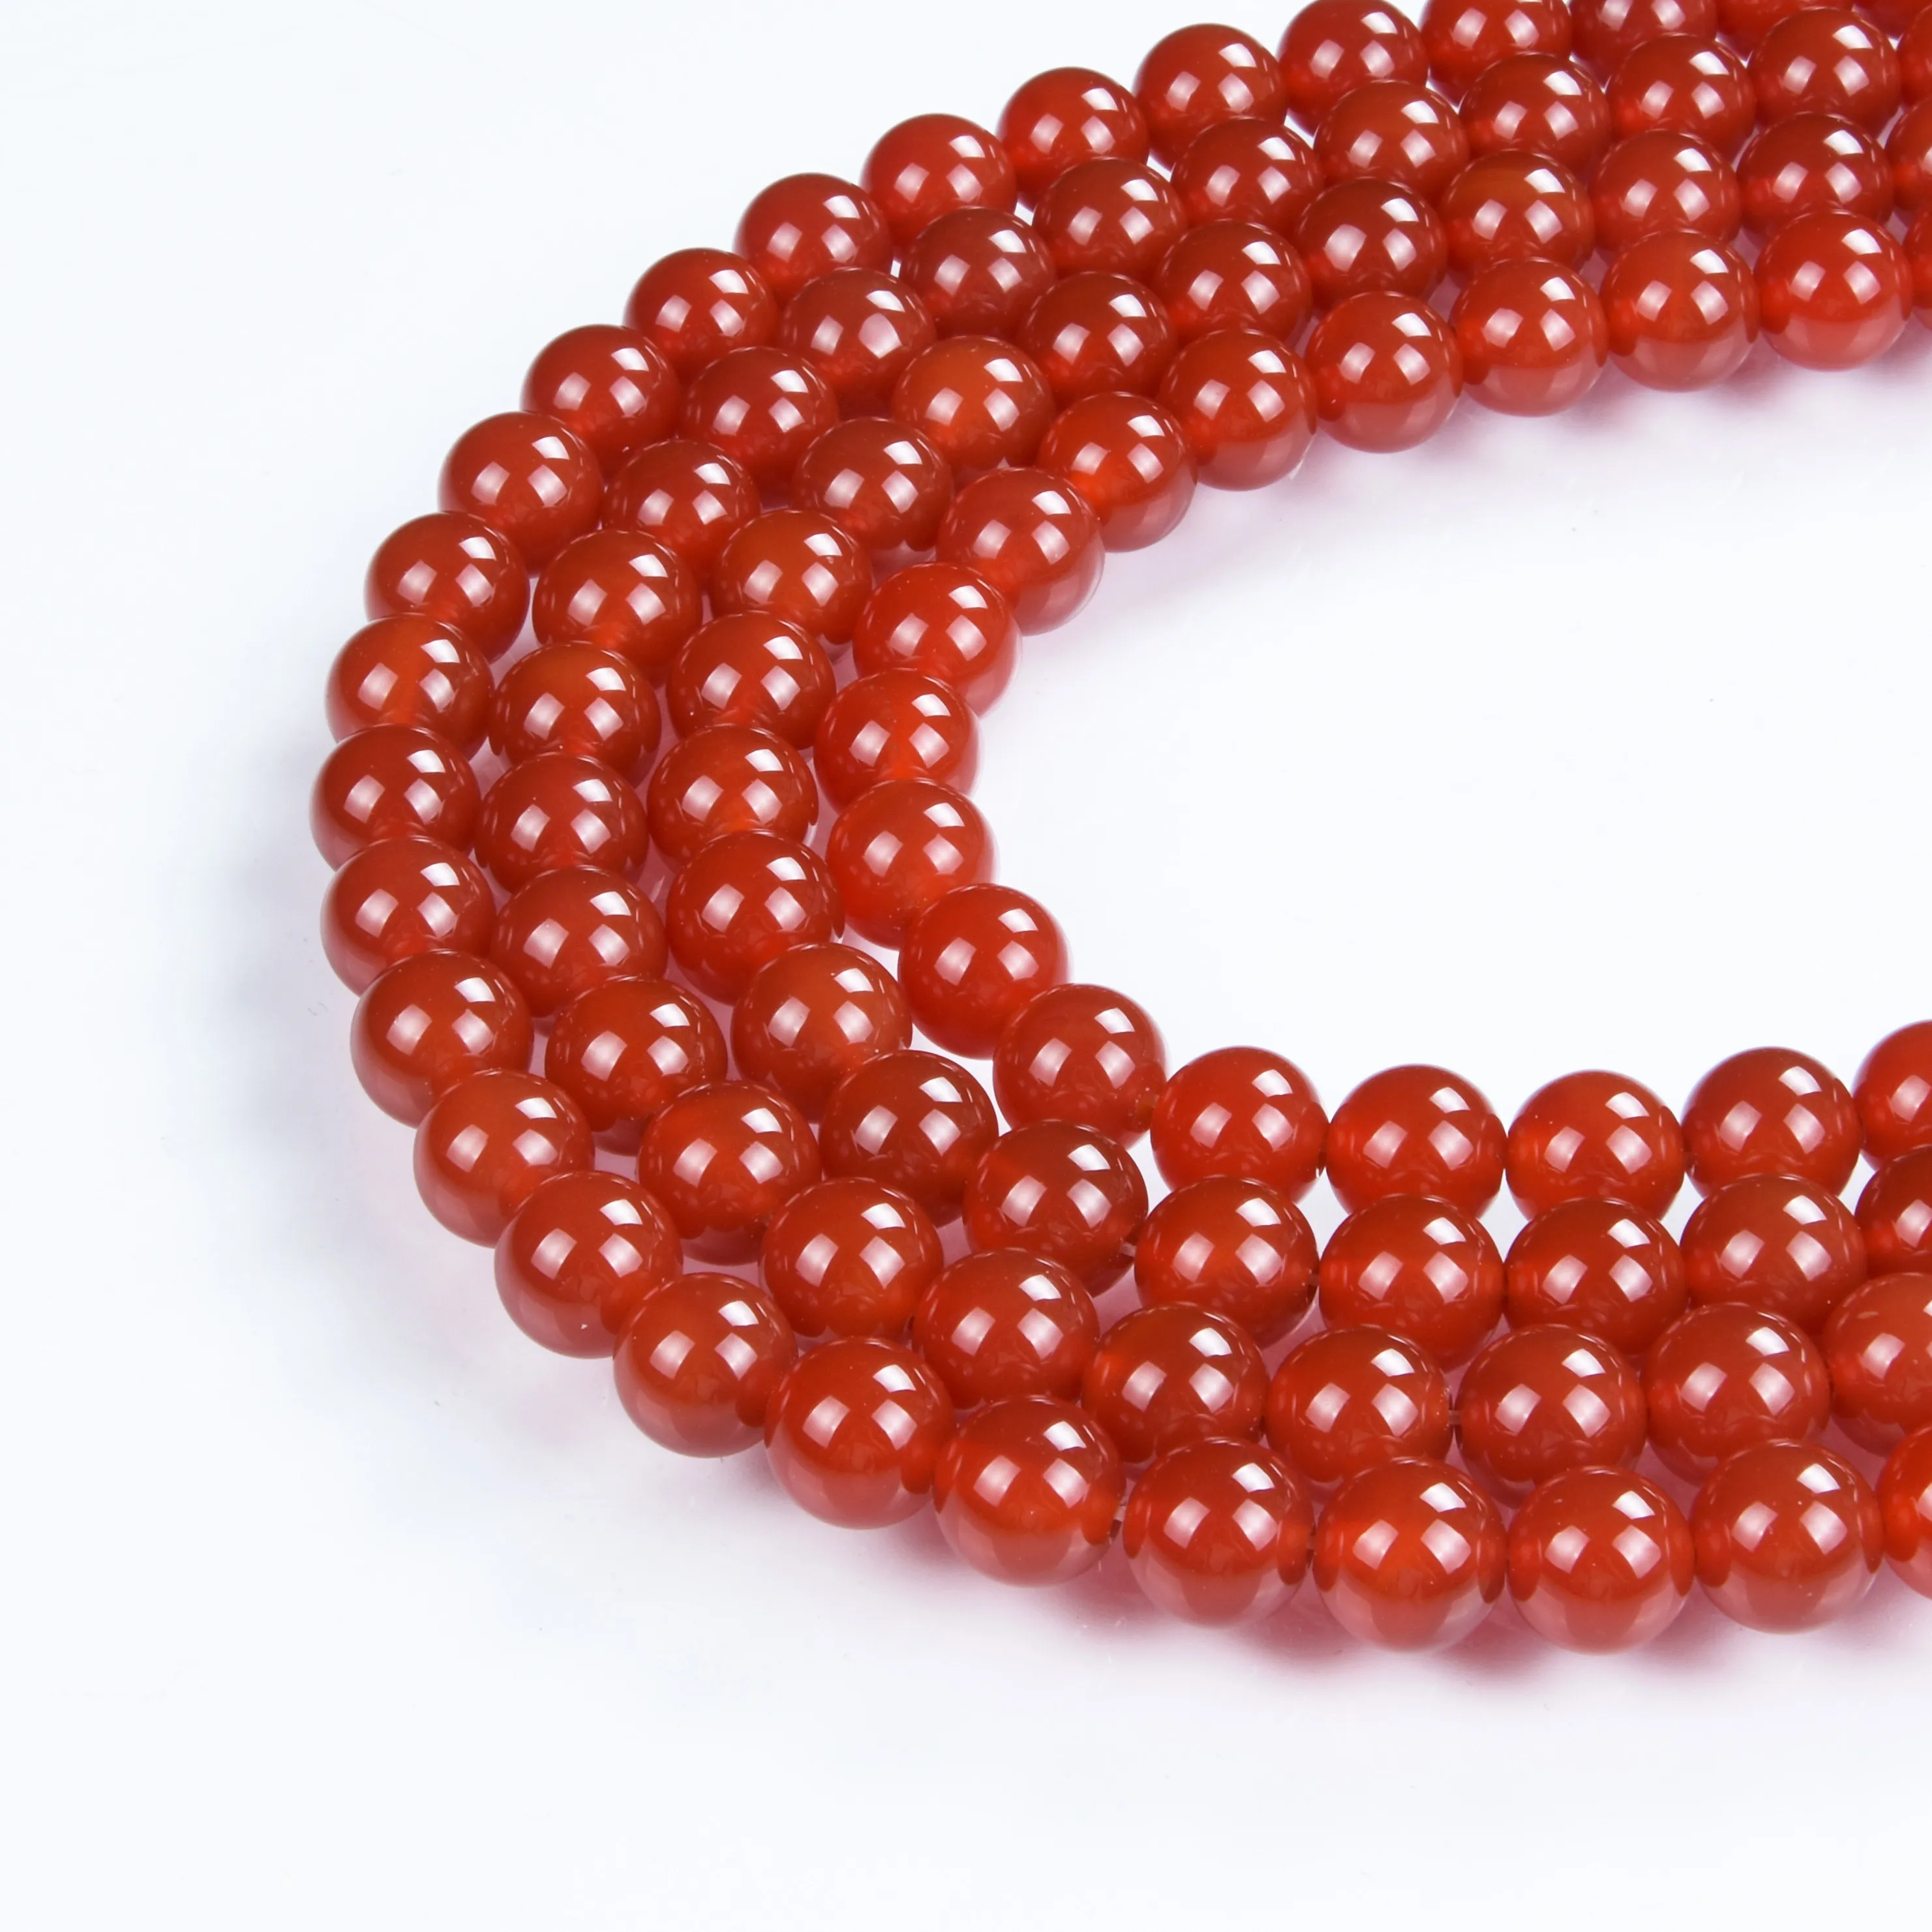 

4mm 6mm 8mm 10mm 12mm Round Beads Strands Loose Natural Red Agate Carnelian Stone Beads for Beaded Bracelet